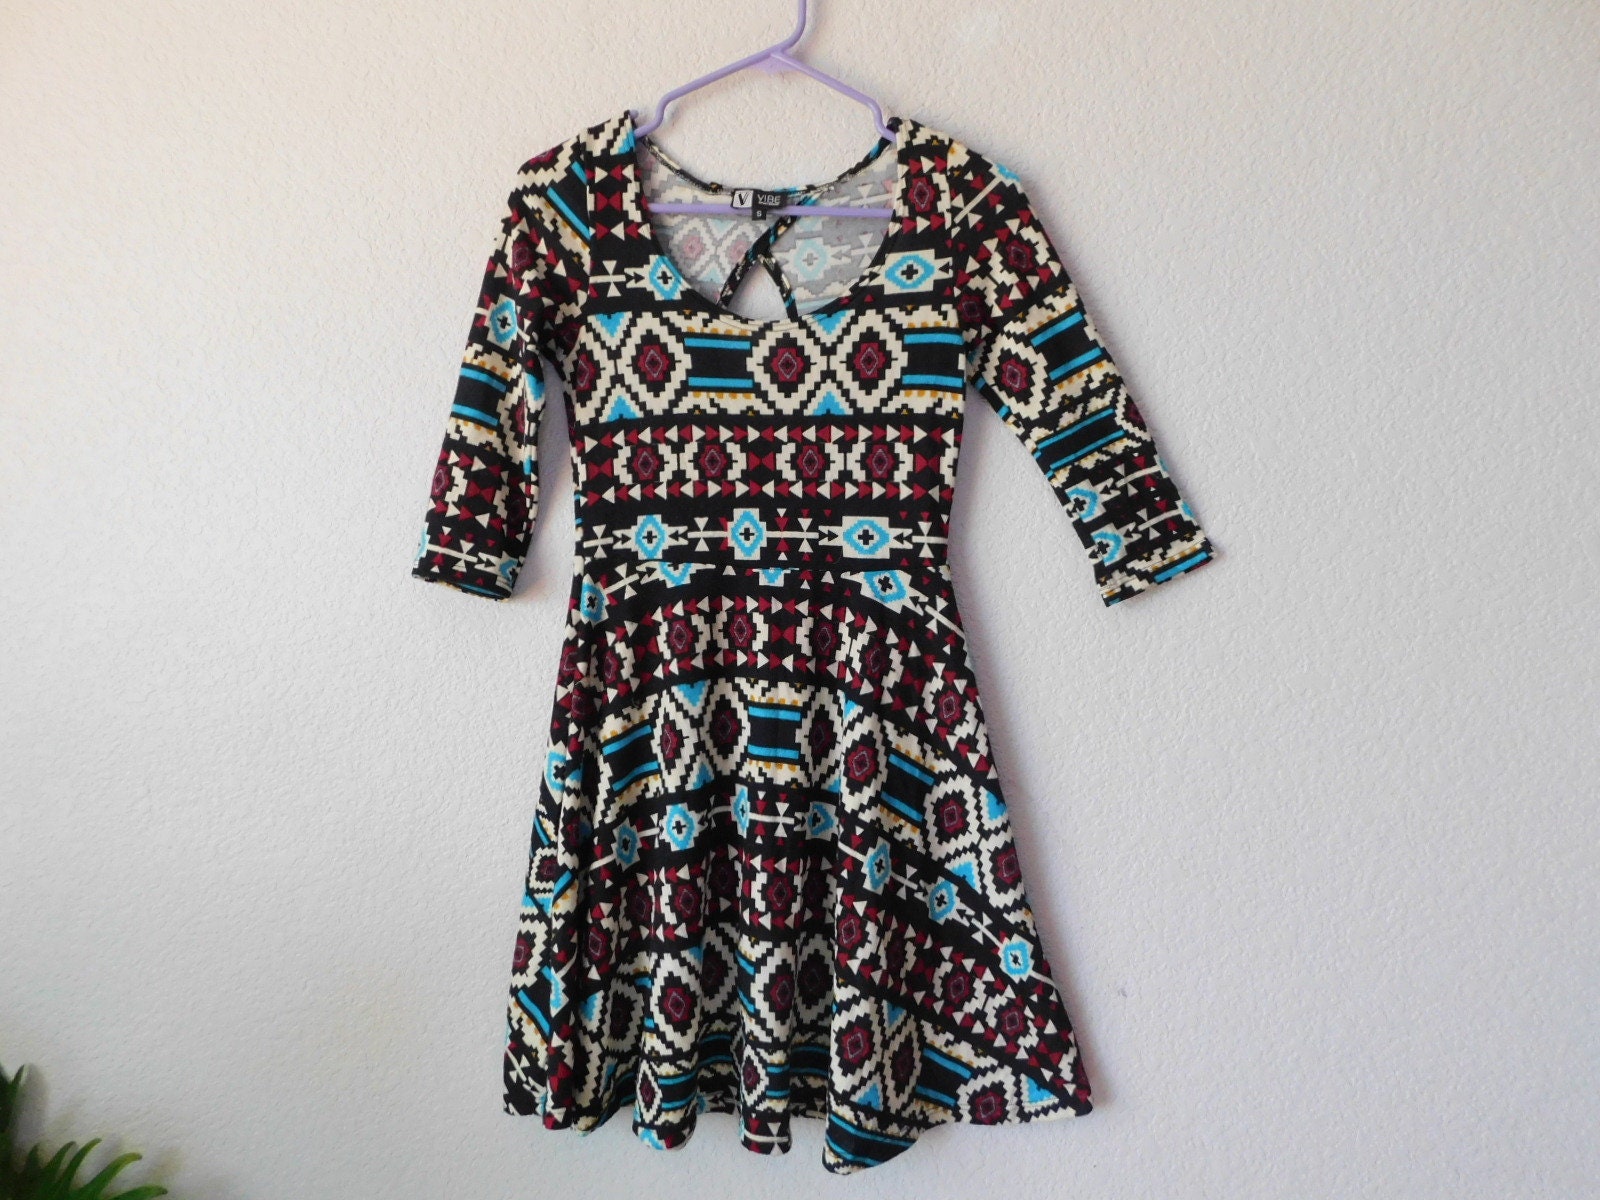  SEANATIVE Vintage Dress for Teen Girls Aztec Tribal Print  Casual Round Neck Dress Knee Length Midi Sundress for 3-14 T : Clothing,  Shoes & Jewelry